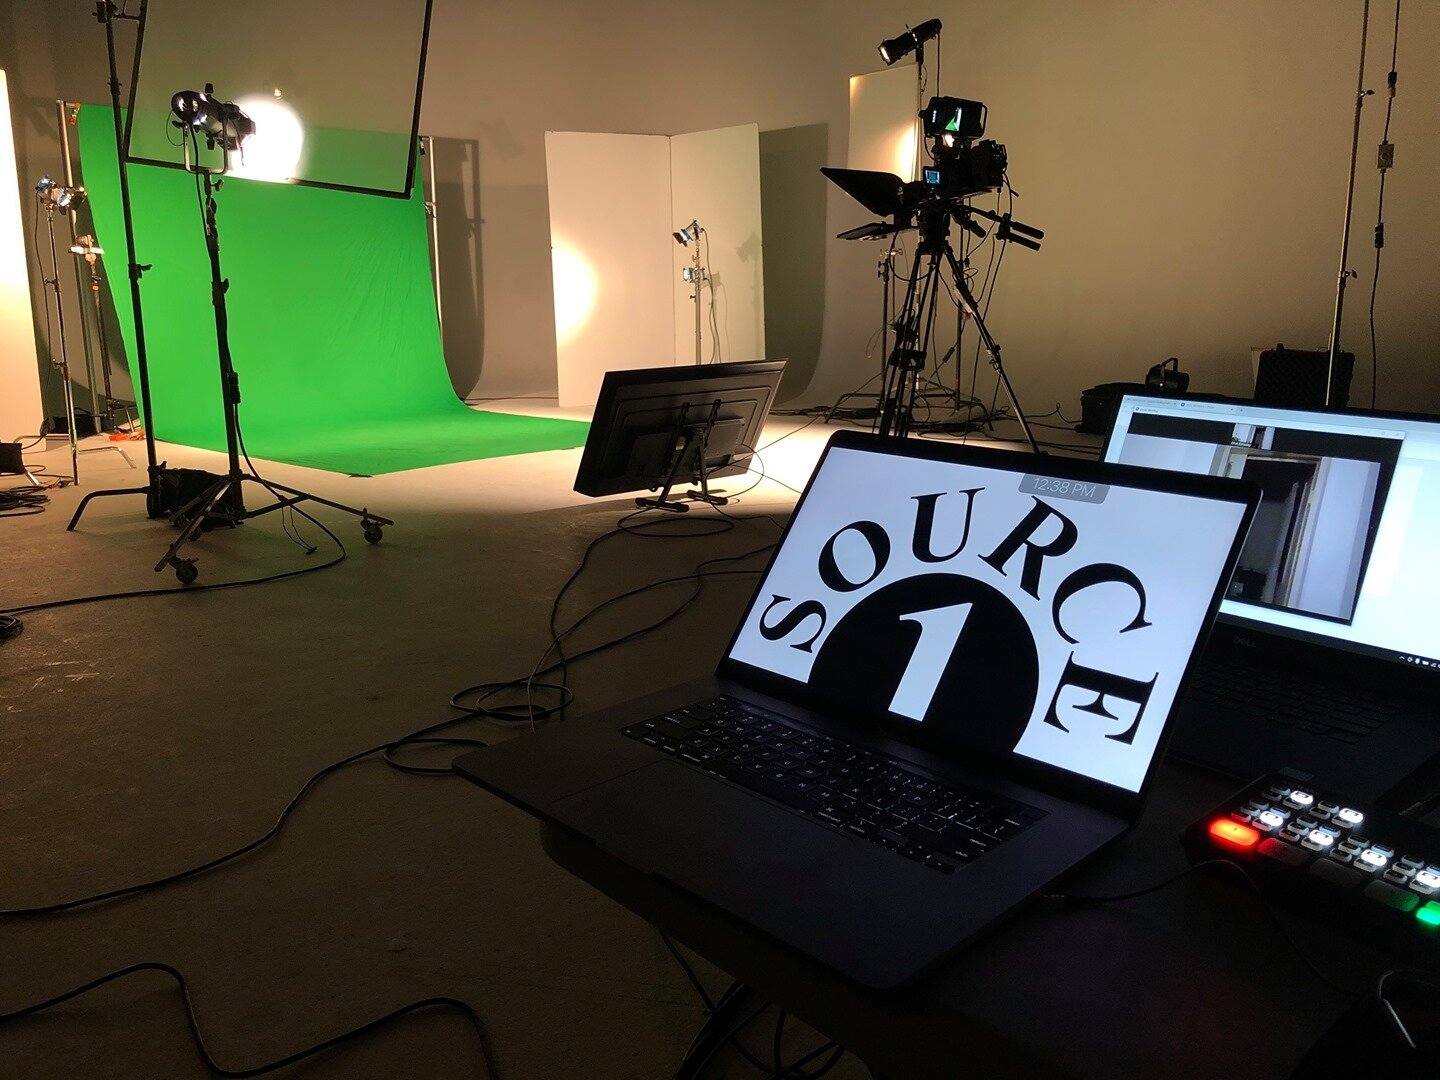 Green screen studio work during the winter of 2021 is the assignment du jour.  Ask me how we can support your virtual event with recording, hosting, moderation and content support. 
We are flexible, adaptable and have an outstanding crew available to